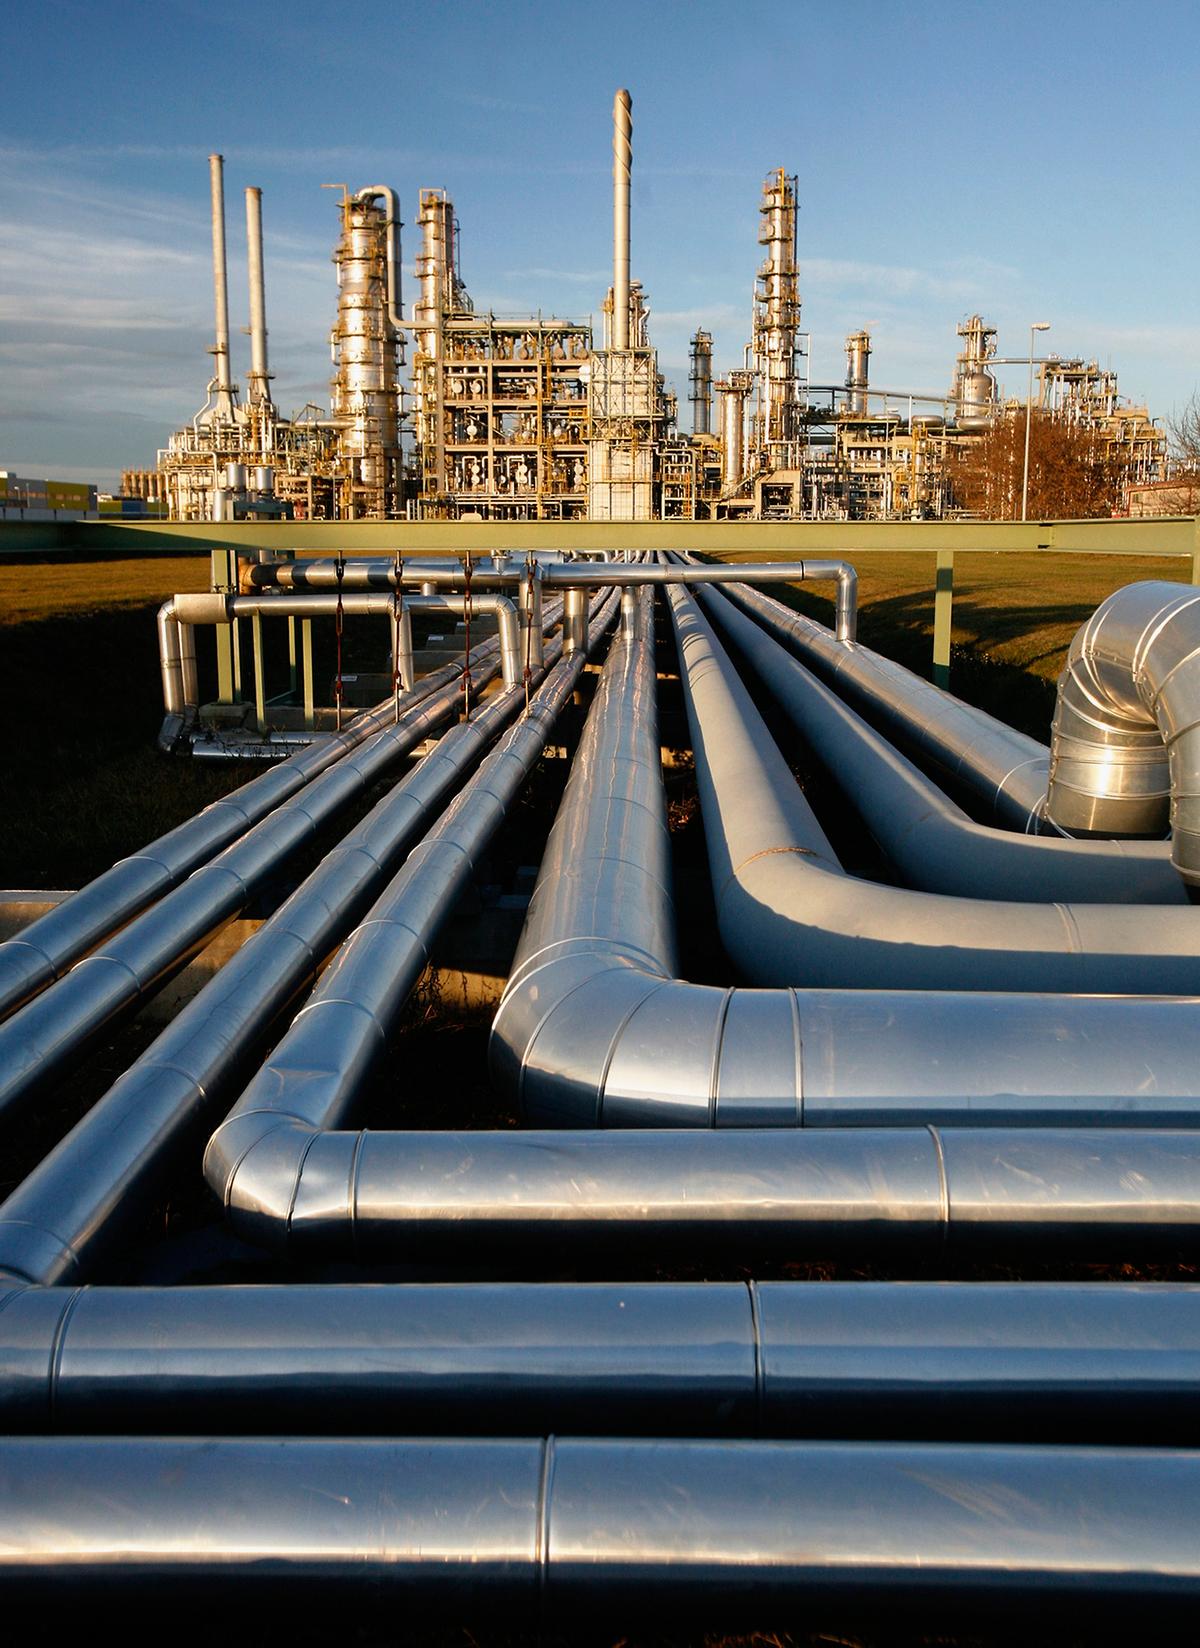 French multinational TOTAL oil refinery in Leuna, Germany, on Jan. 10, 2007. (Katja Buchholz/Getty Images)